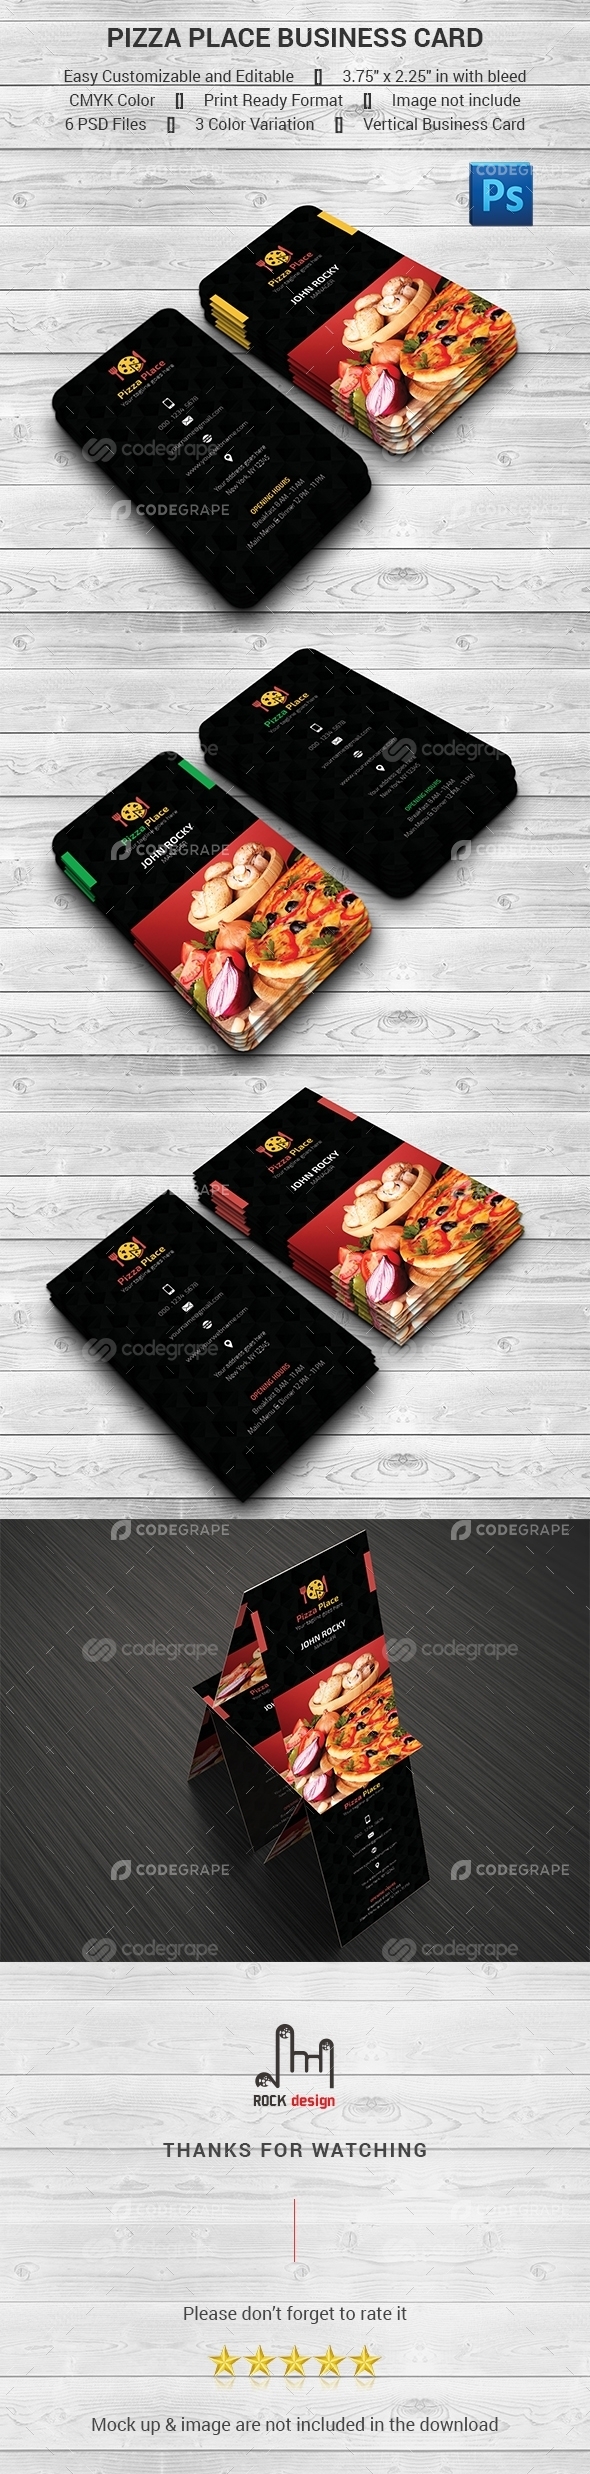 Pizza Place Business Card